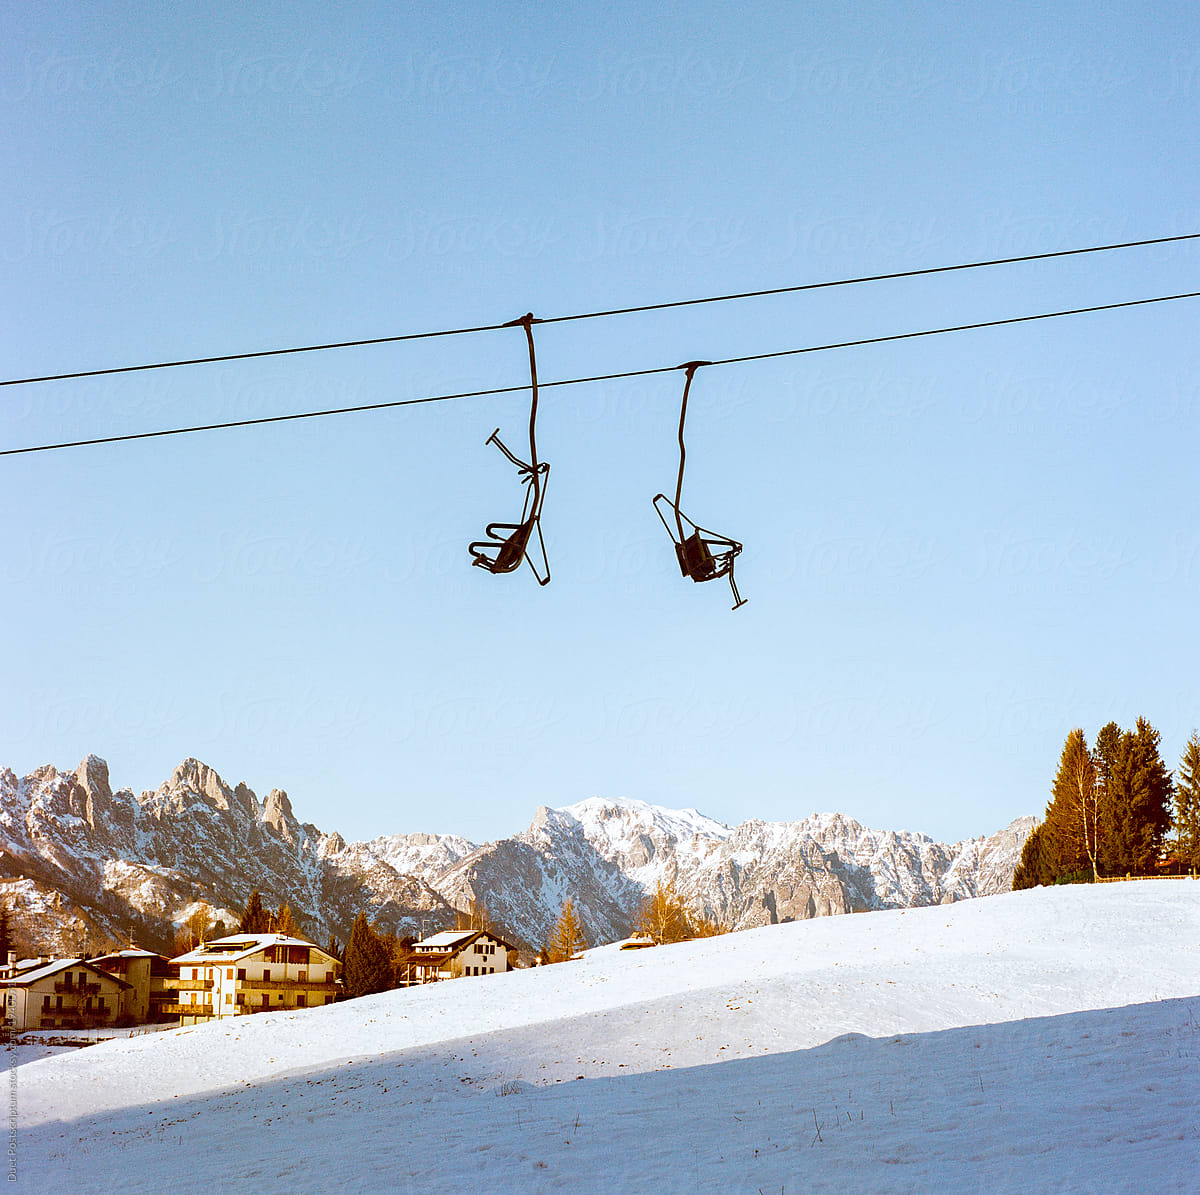 Mountain landscape with hotels and a ski lift